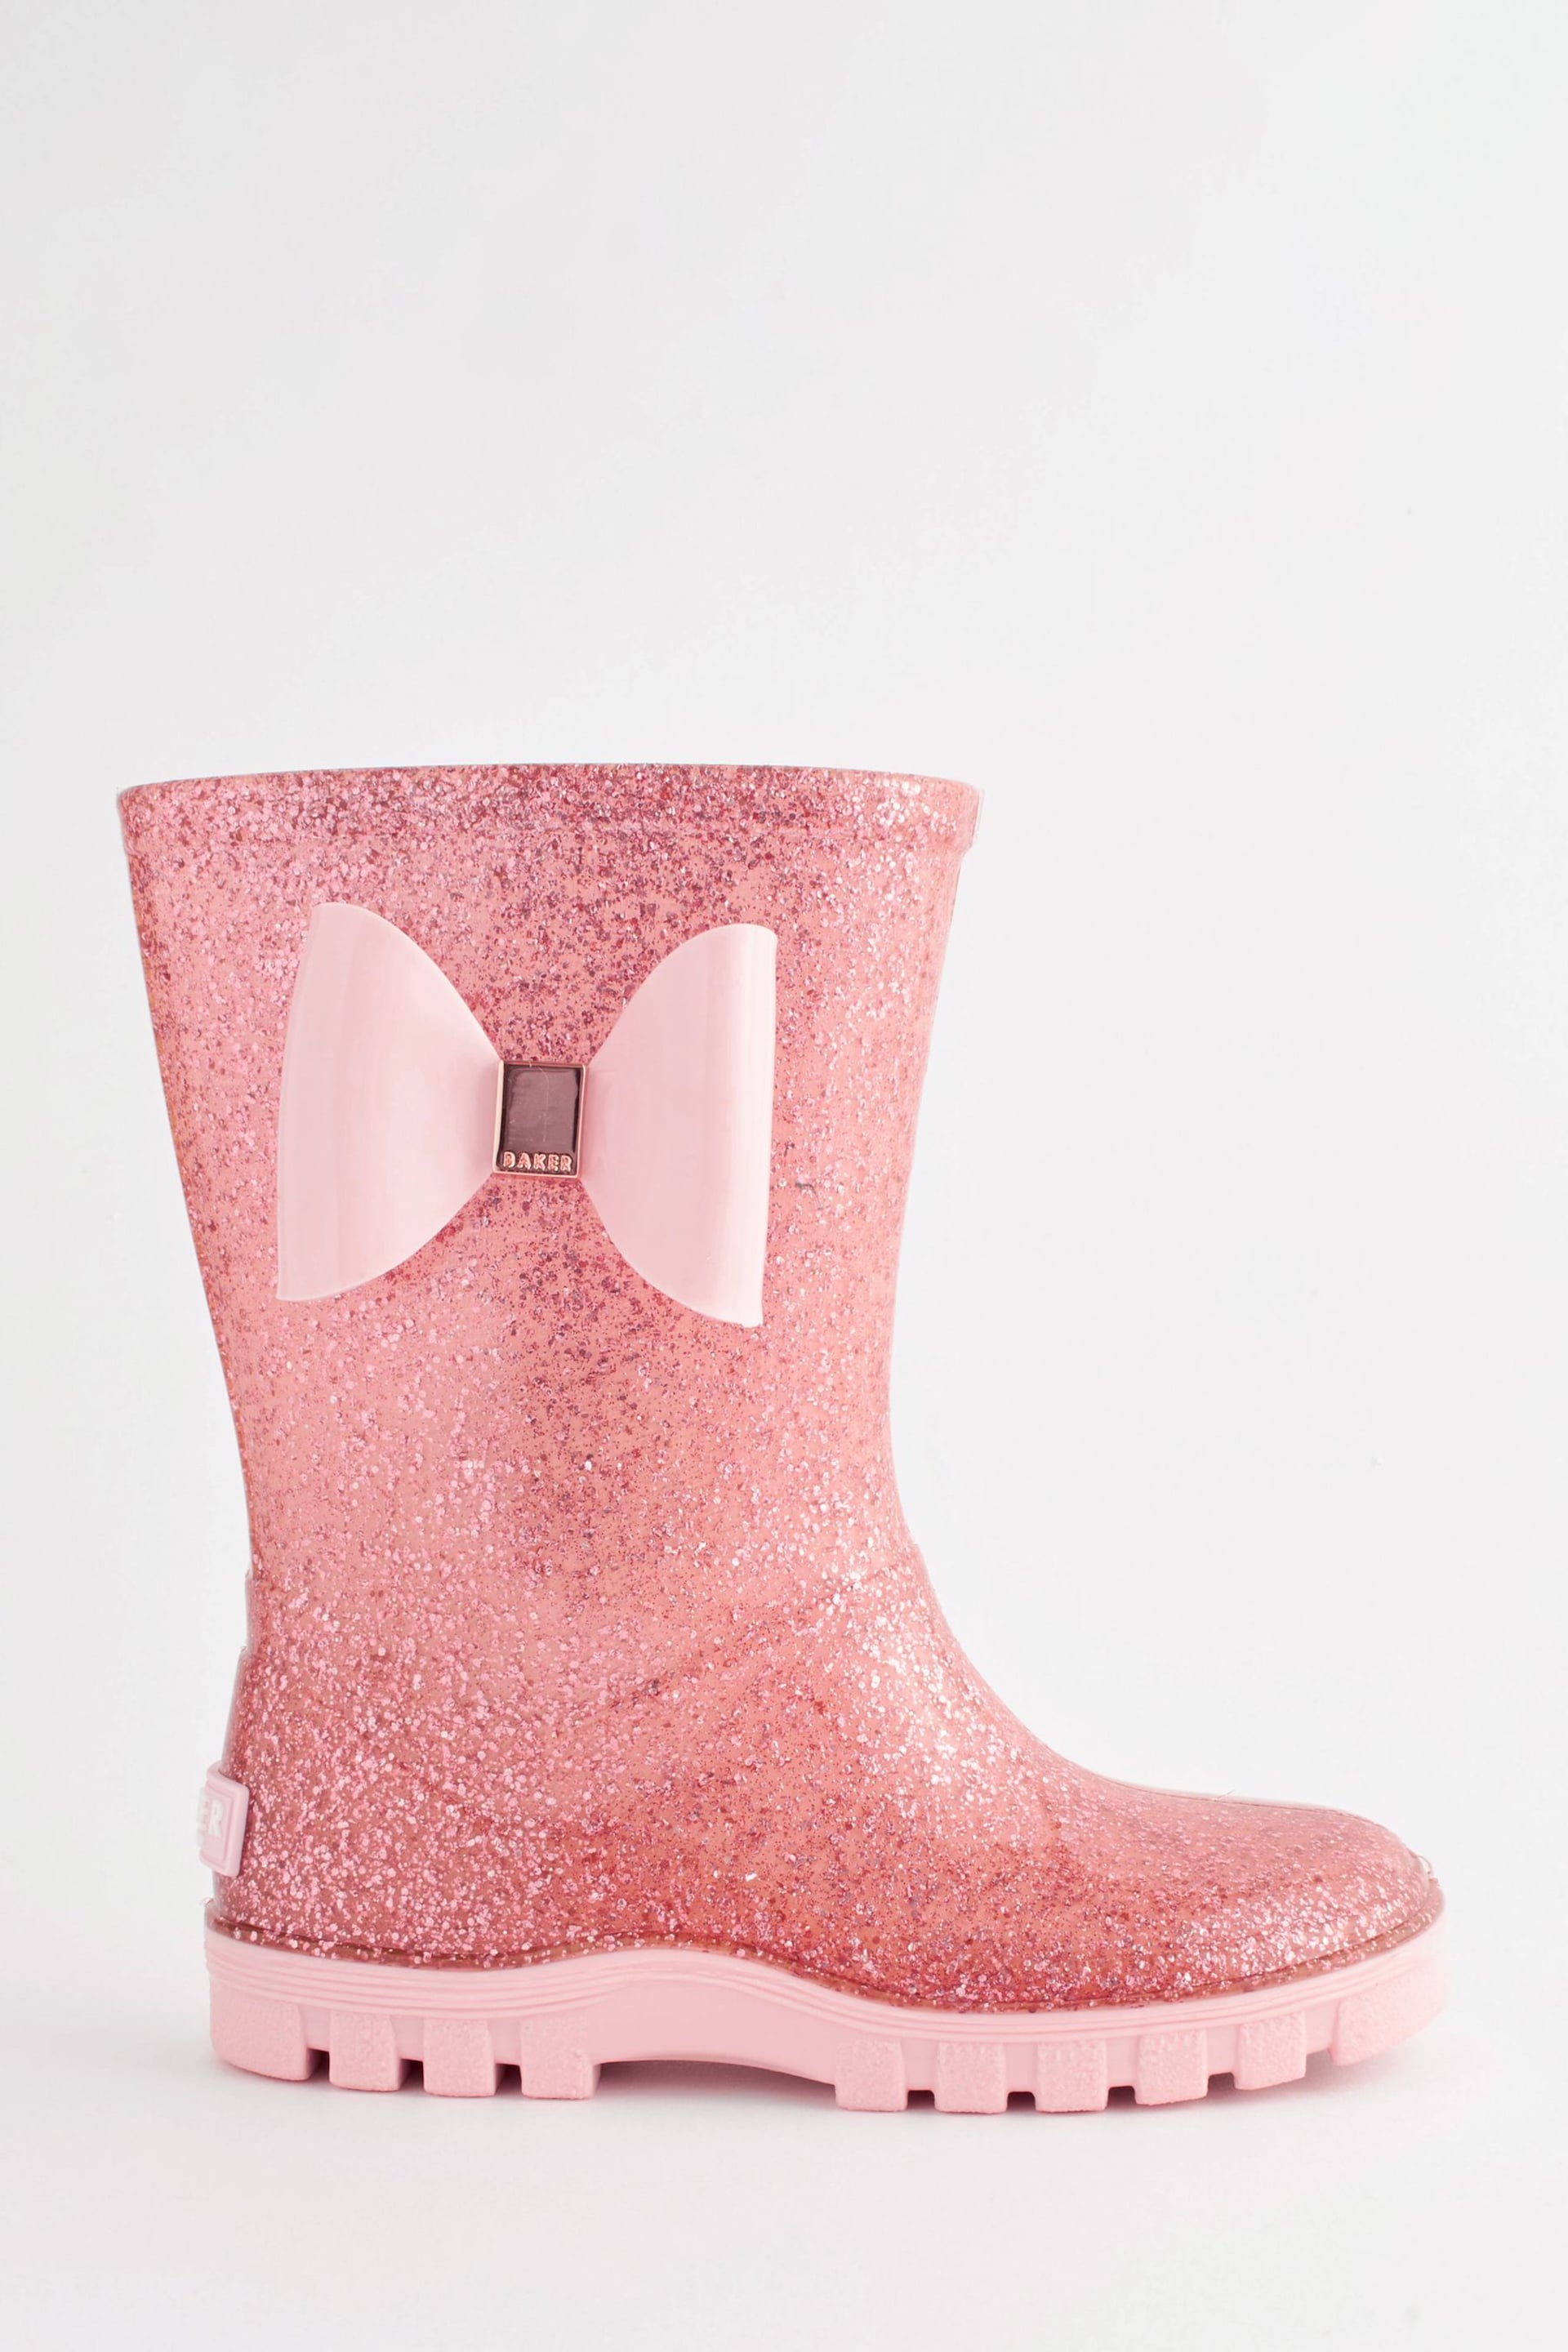 Baker by Ted Baker Girls Glitter Welly Boots with Bow - Image 1 of 6